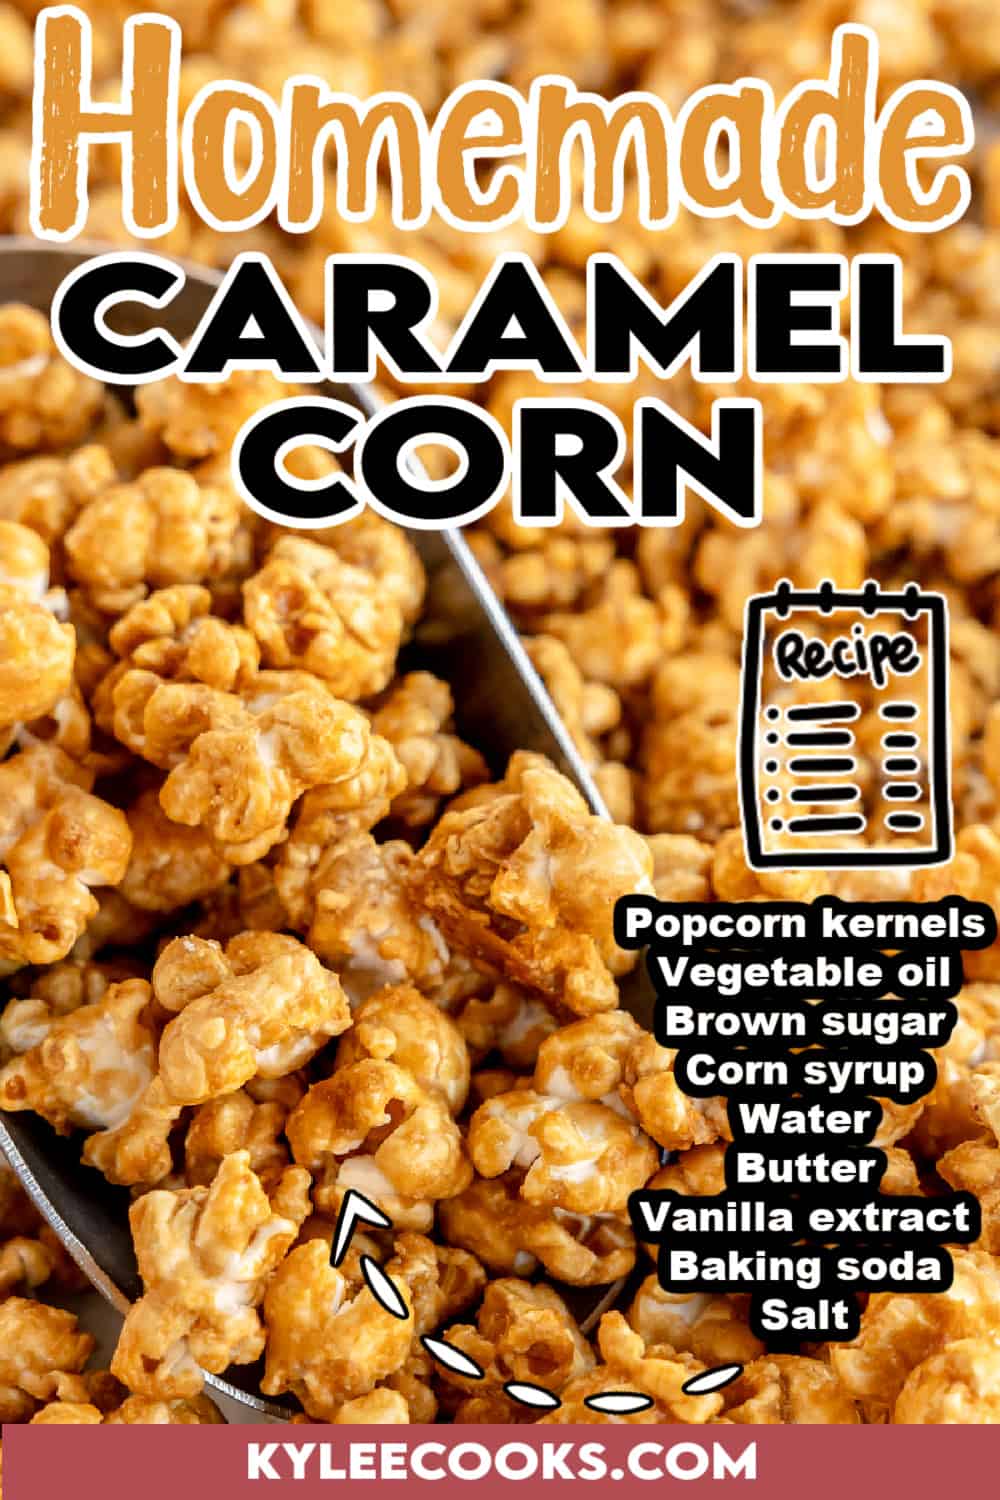 scoop of homemade caramel corn with recipe name and ingredients overlaid in text.